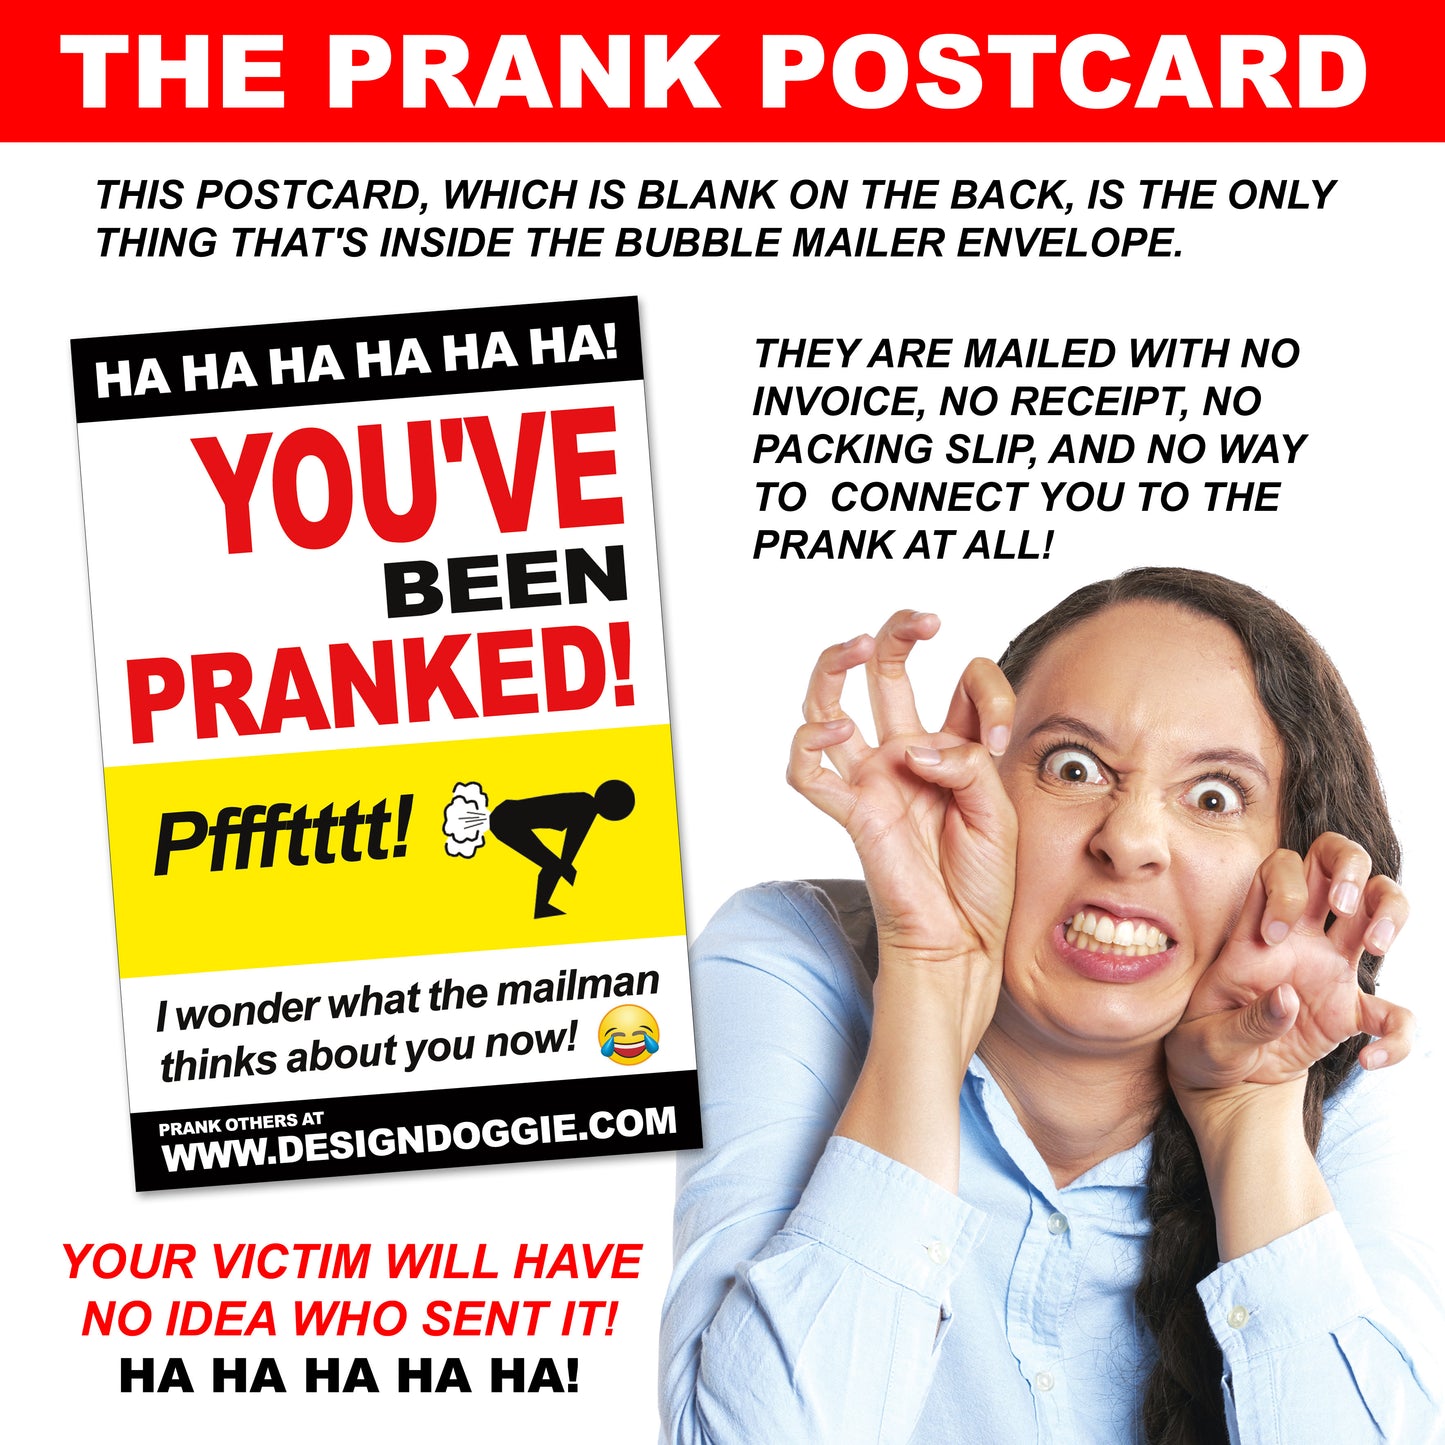 Nudist Colony embarrassing prank envelope gets mailed directly to your victims 100% anonymously!